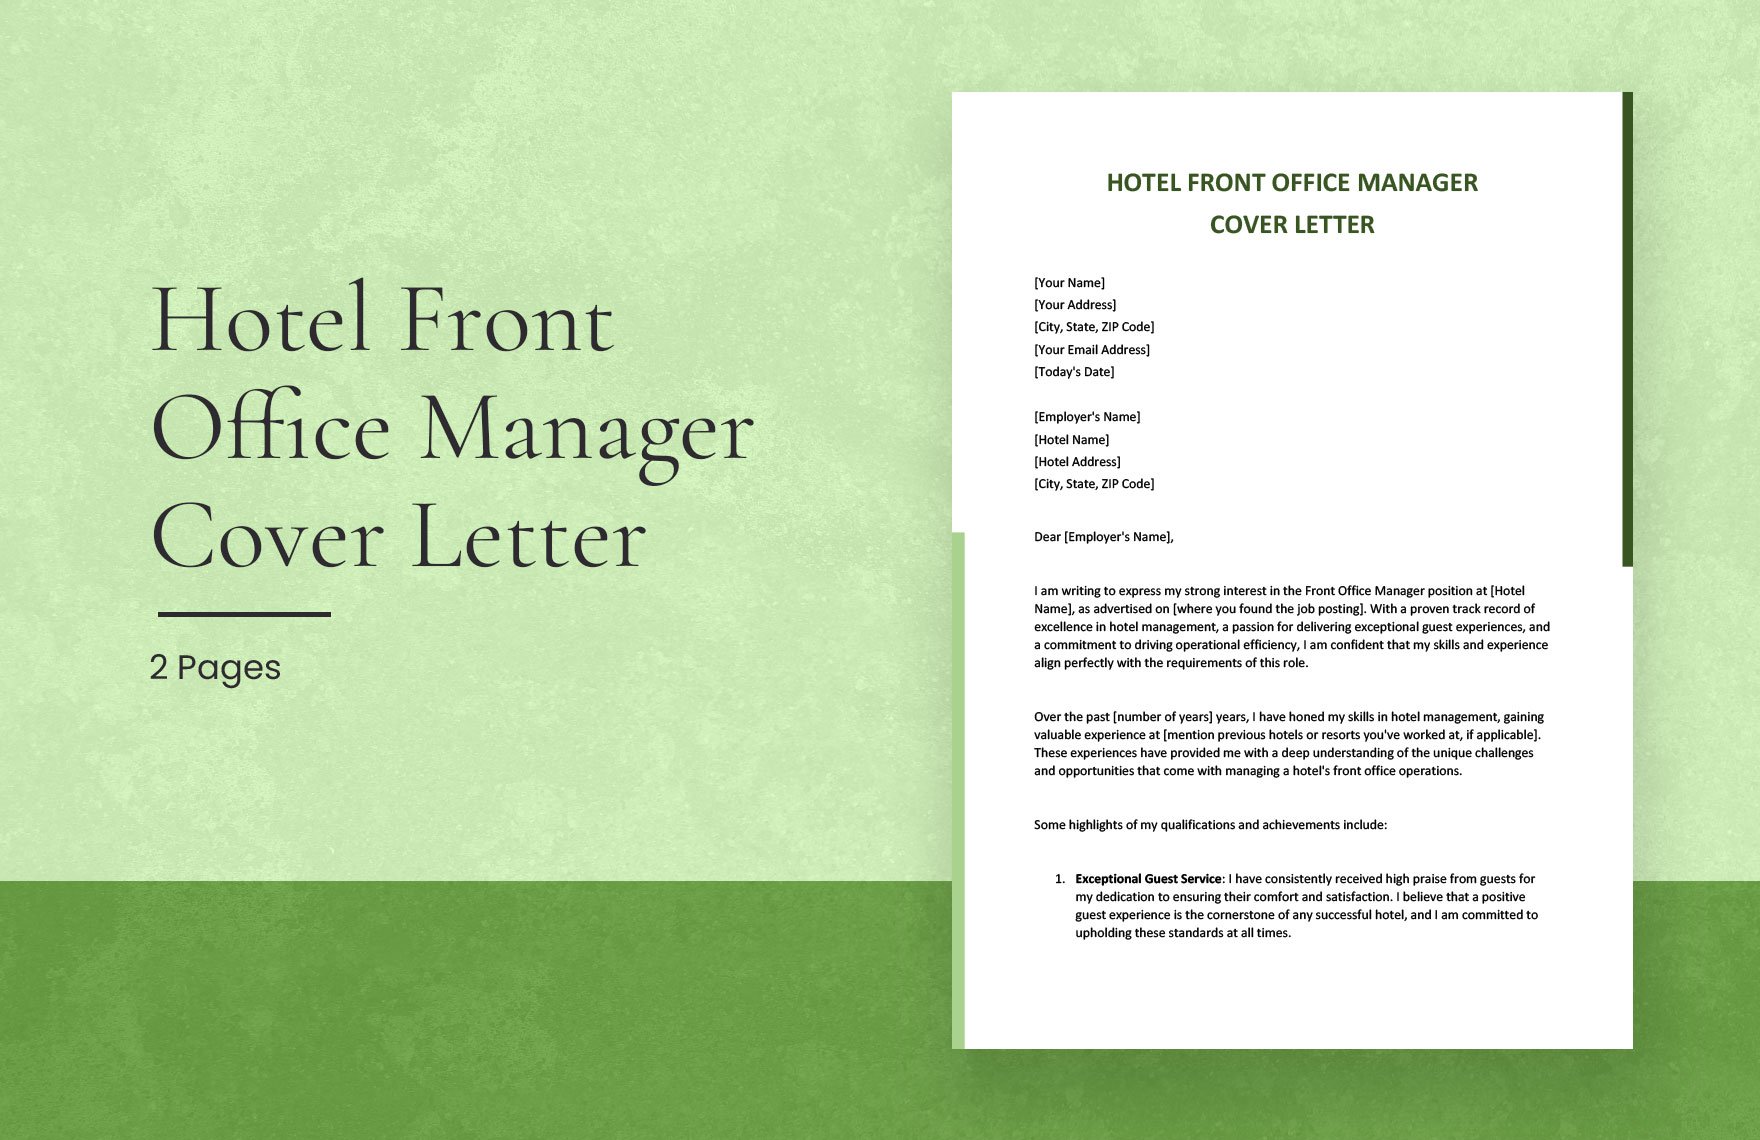 Hotel Front Office Manager Cover Letter